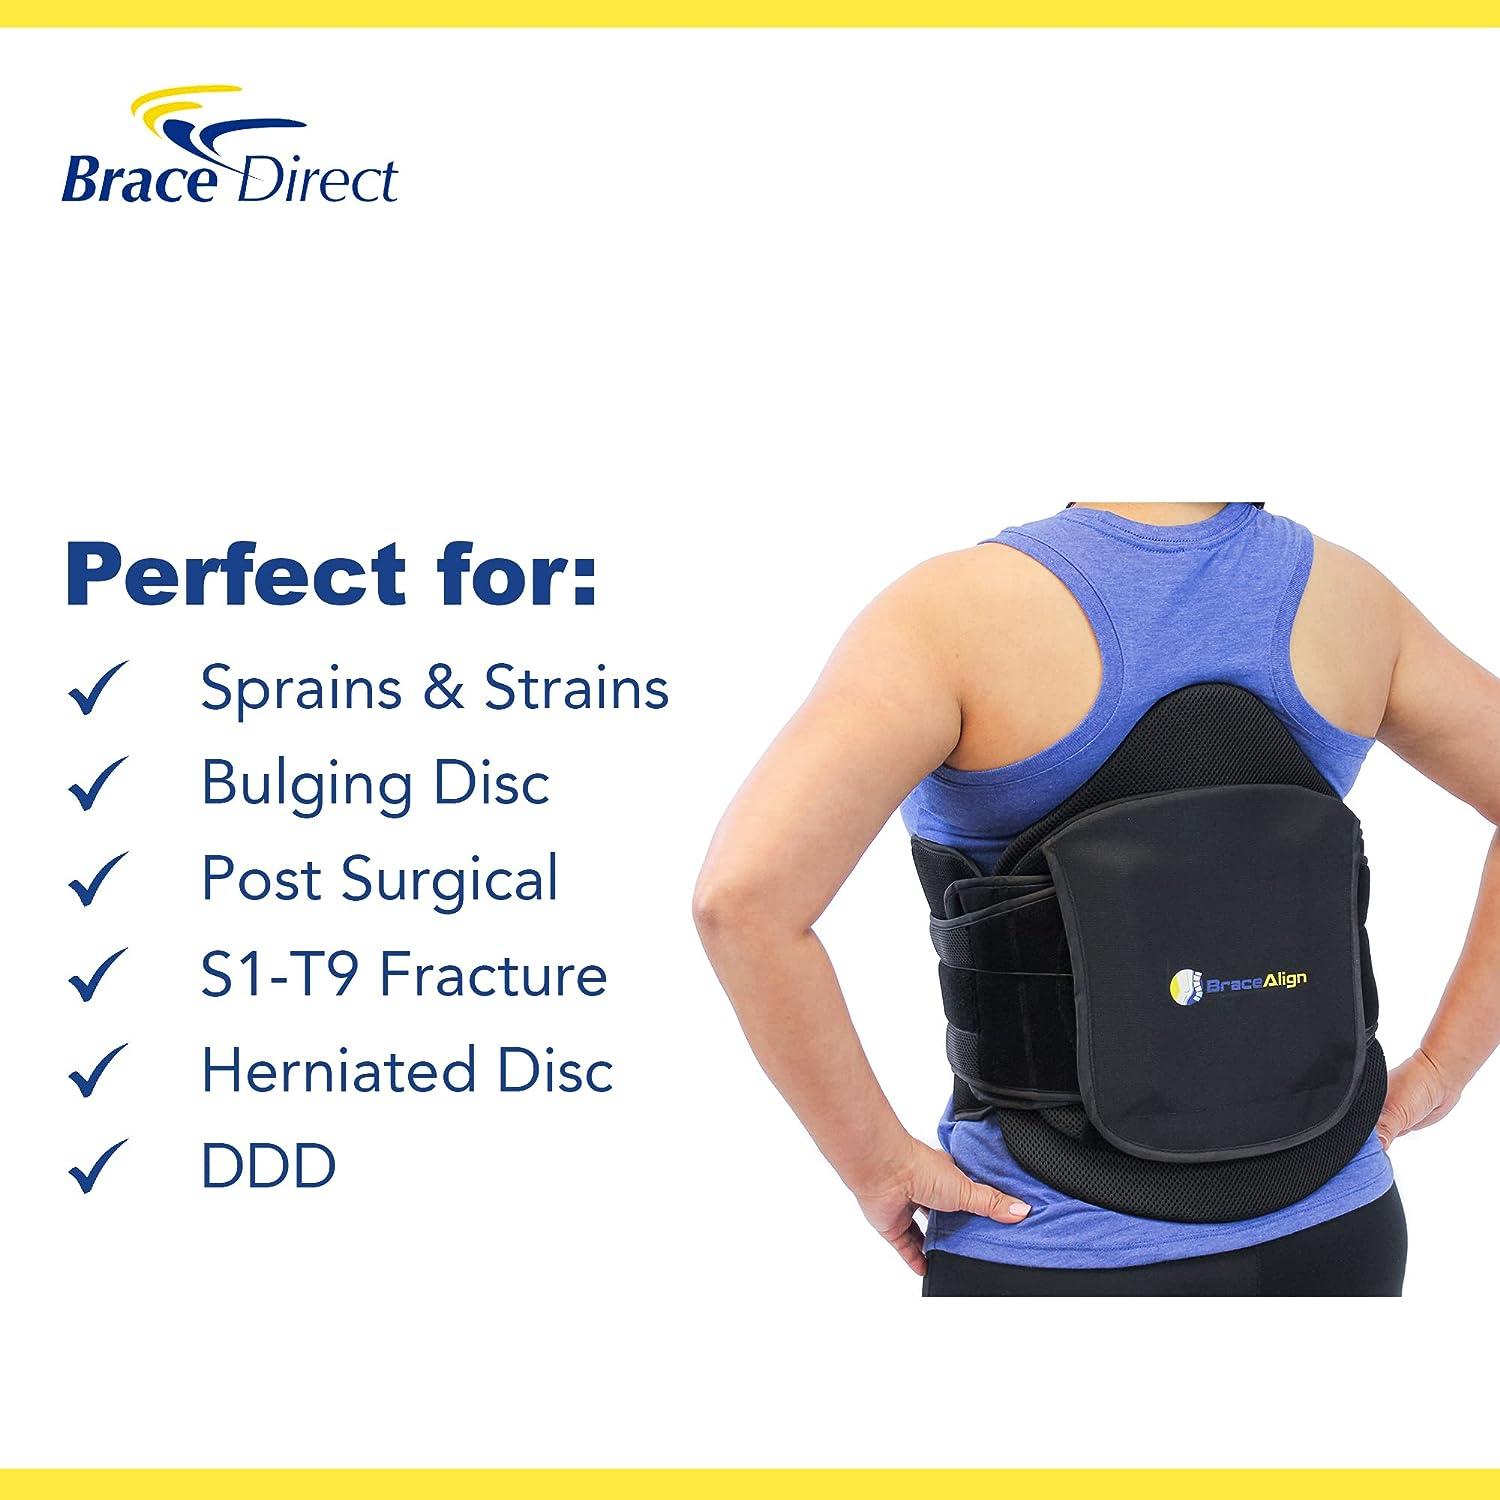 Brace Align VertebrAlign LSO Medical Back Brace L0650 L0637 - Pain Relief  and Recovery from Herniated Bulging Slipped Disc Sciatica DDD Spine  Stenosis Fractures and more Black Universal